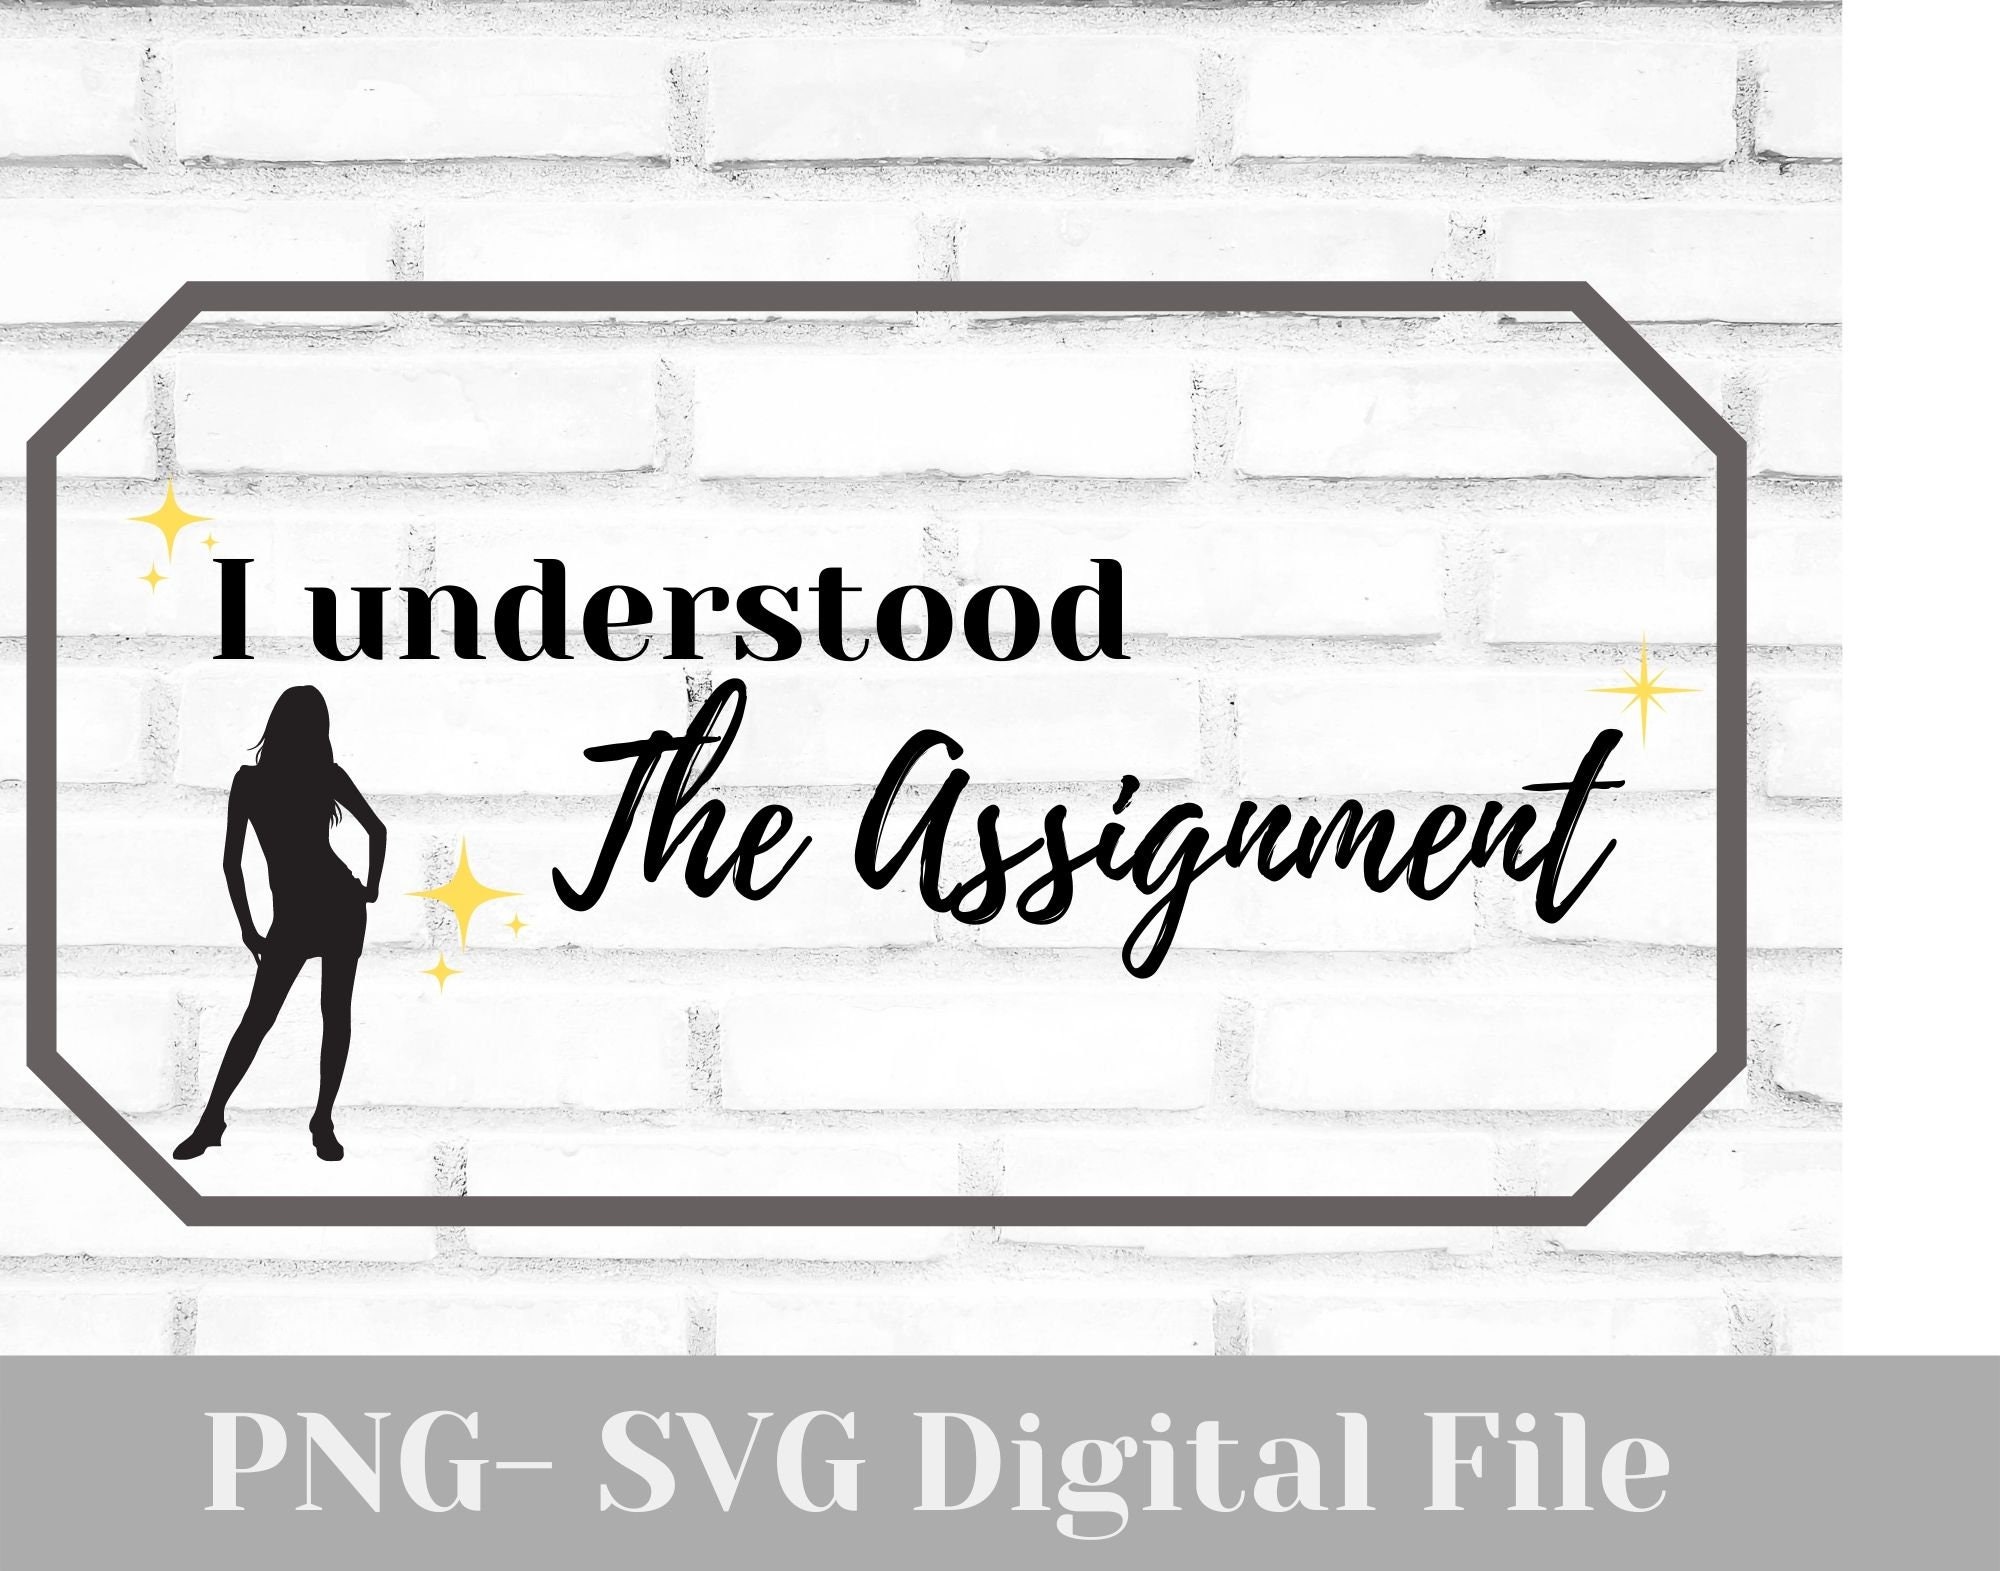 i understood the assignment audio clip download